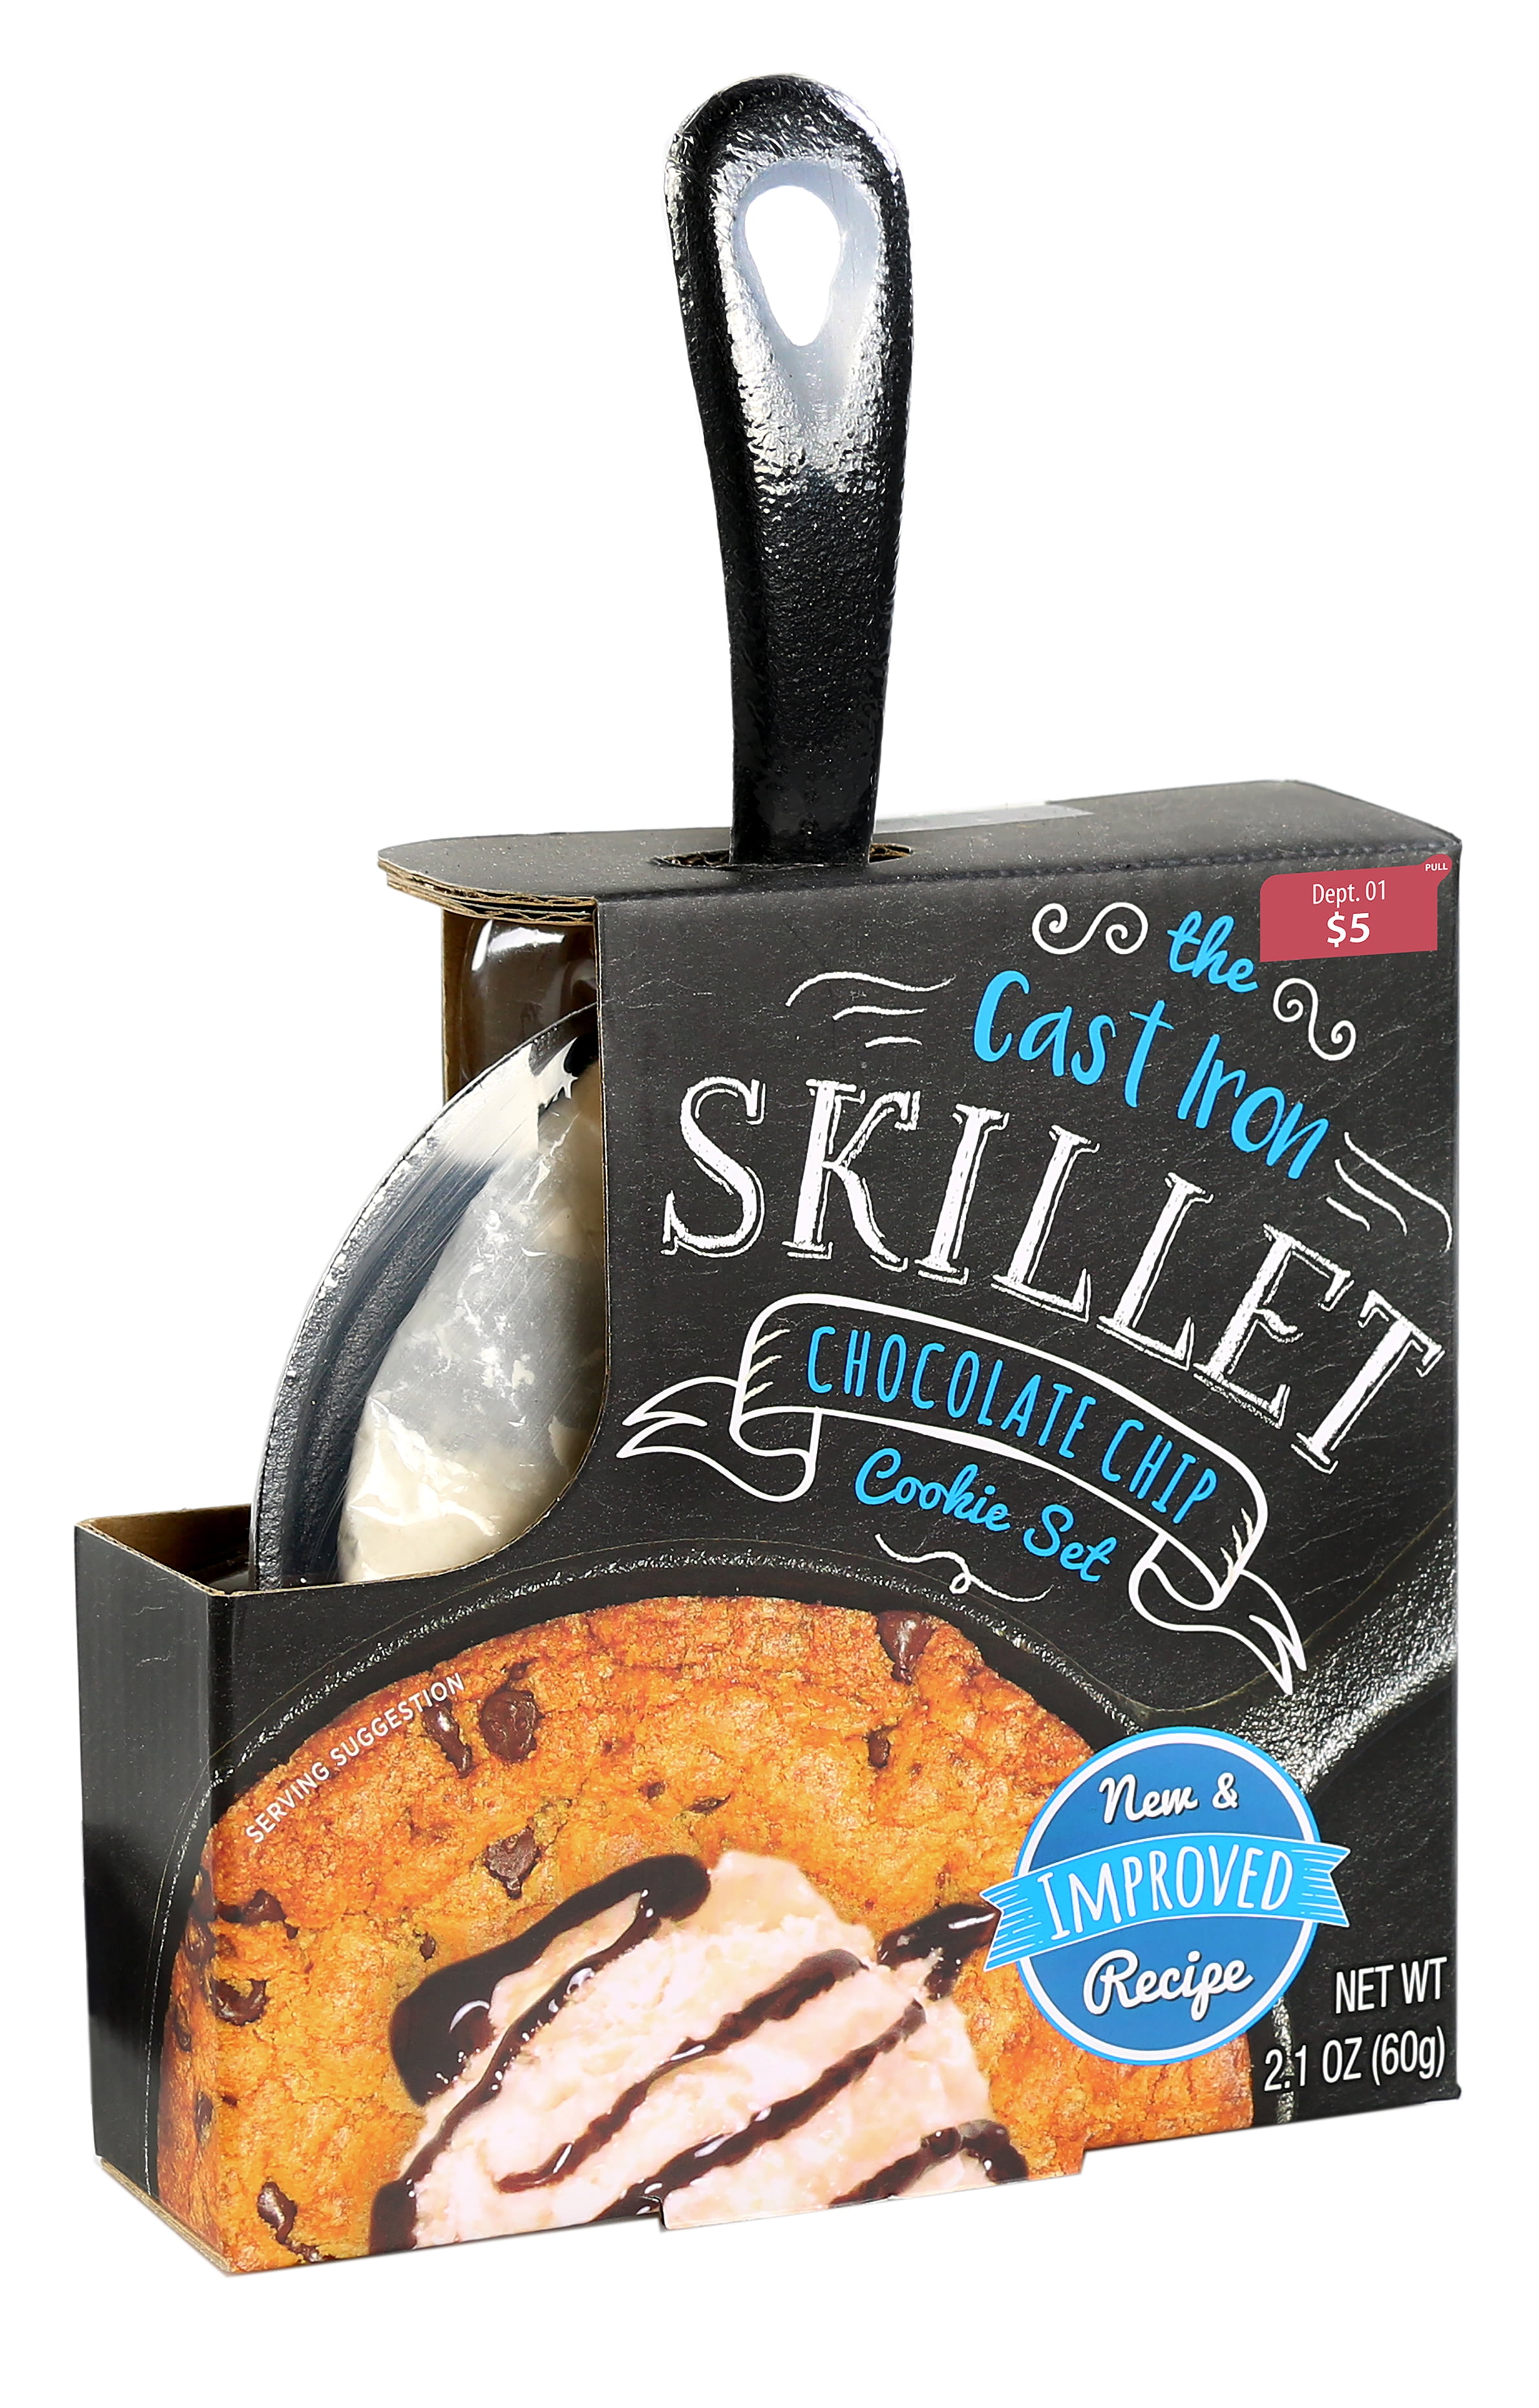 Cookie Mix And Skillet Gift Set》6 Cast Iron Skillet, Chocolate Chip Cookie  Mix